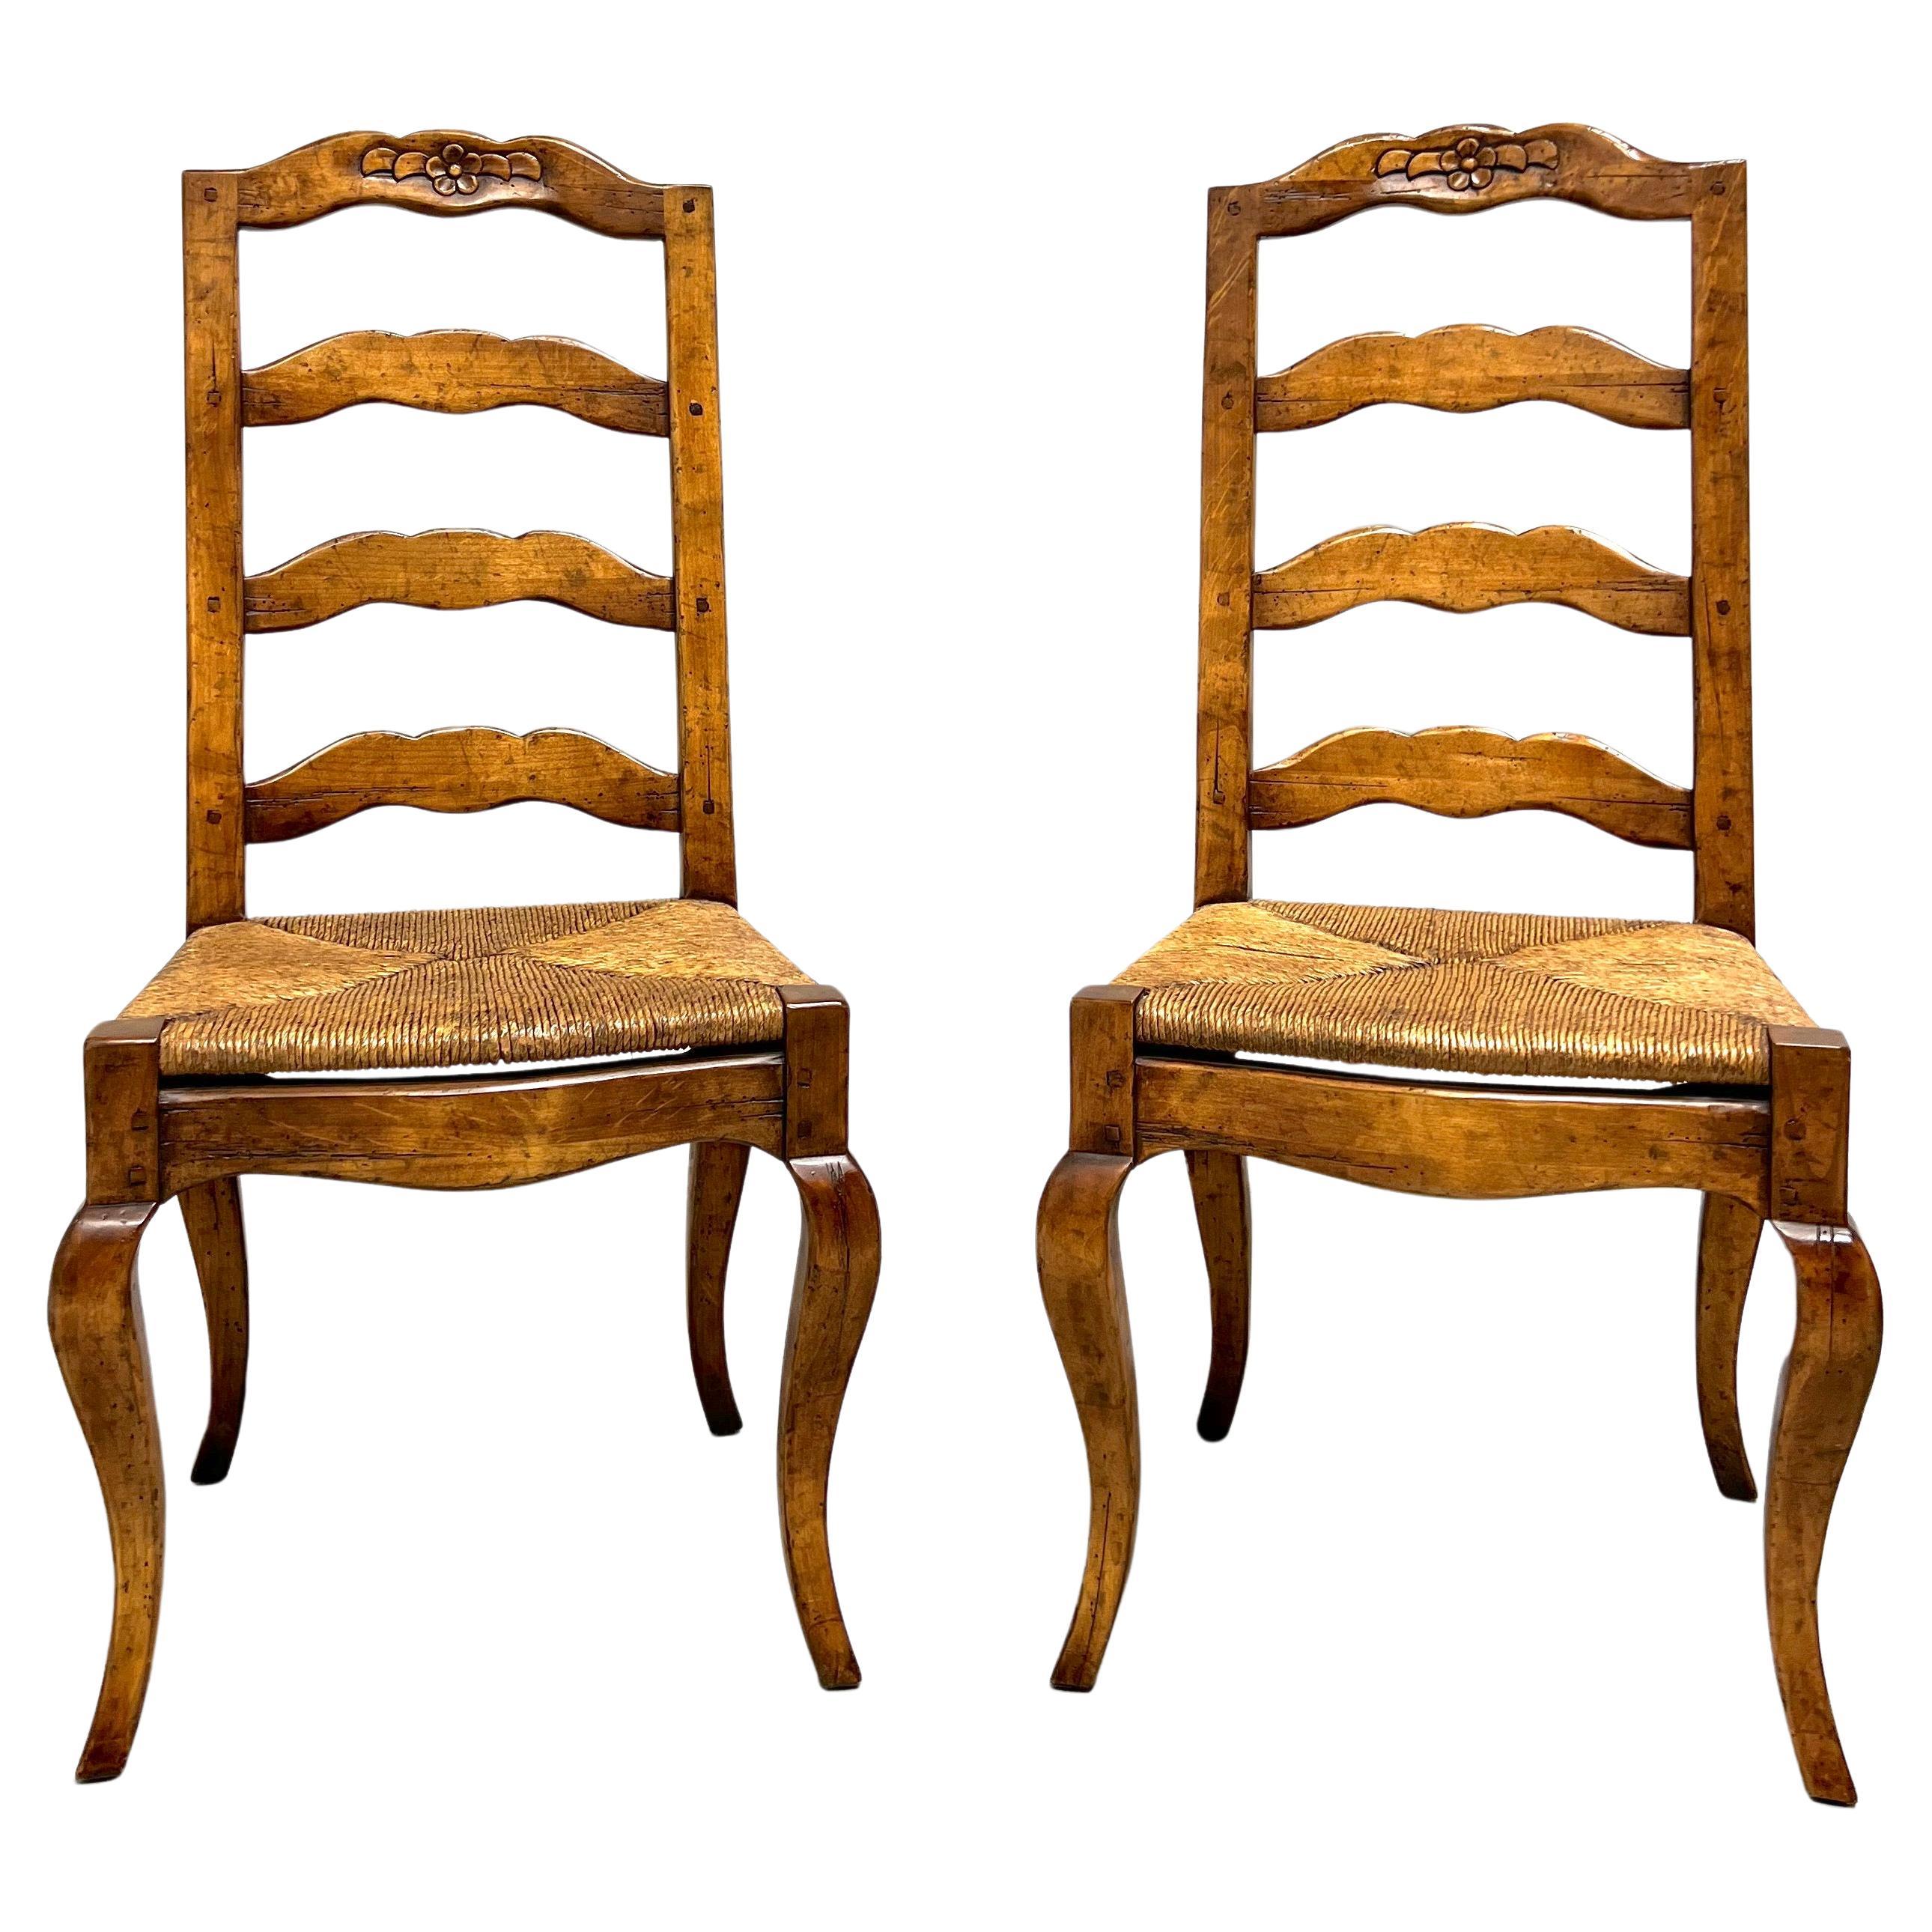 Late 20th C. Distressed French Country Dining Side Chairs w/ Rush Seats - Pair A